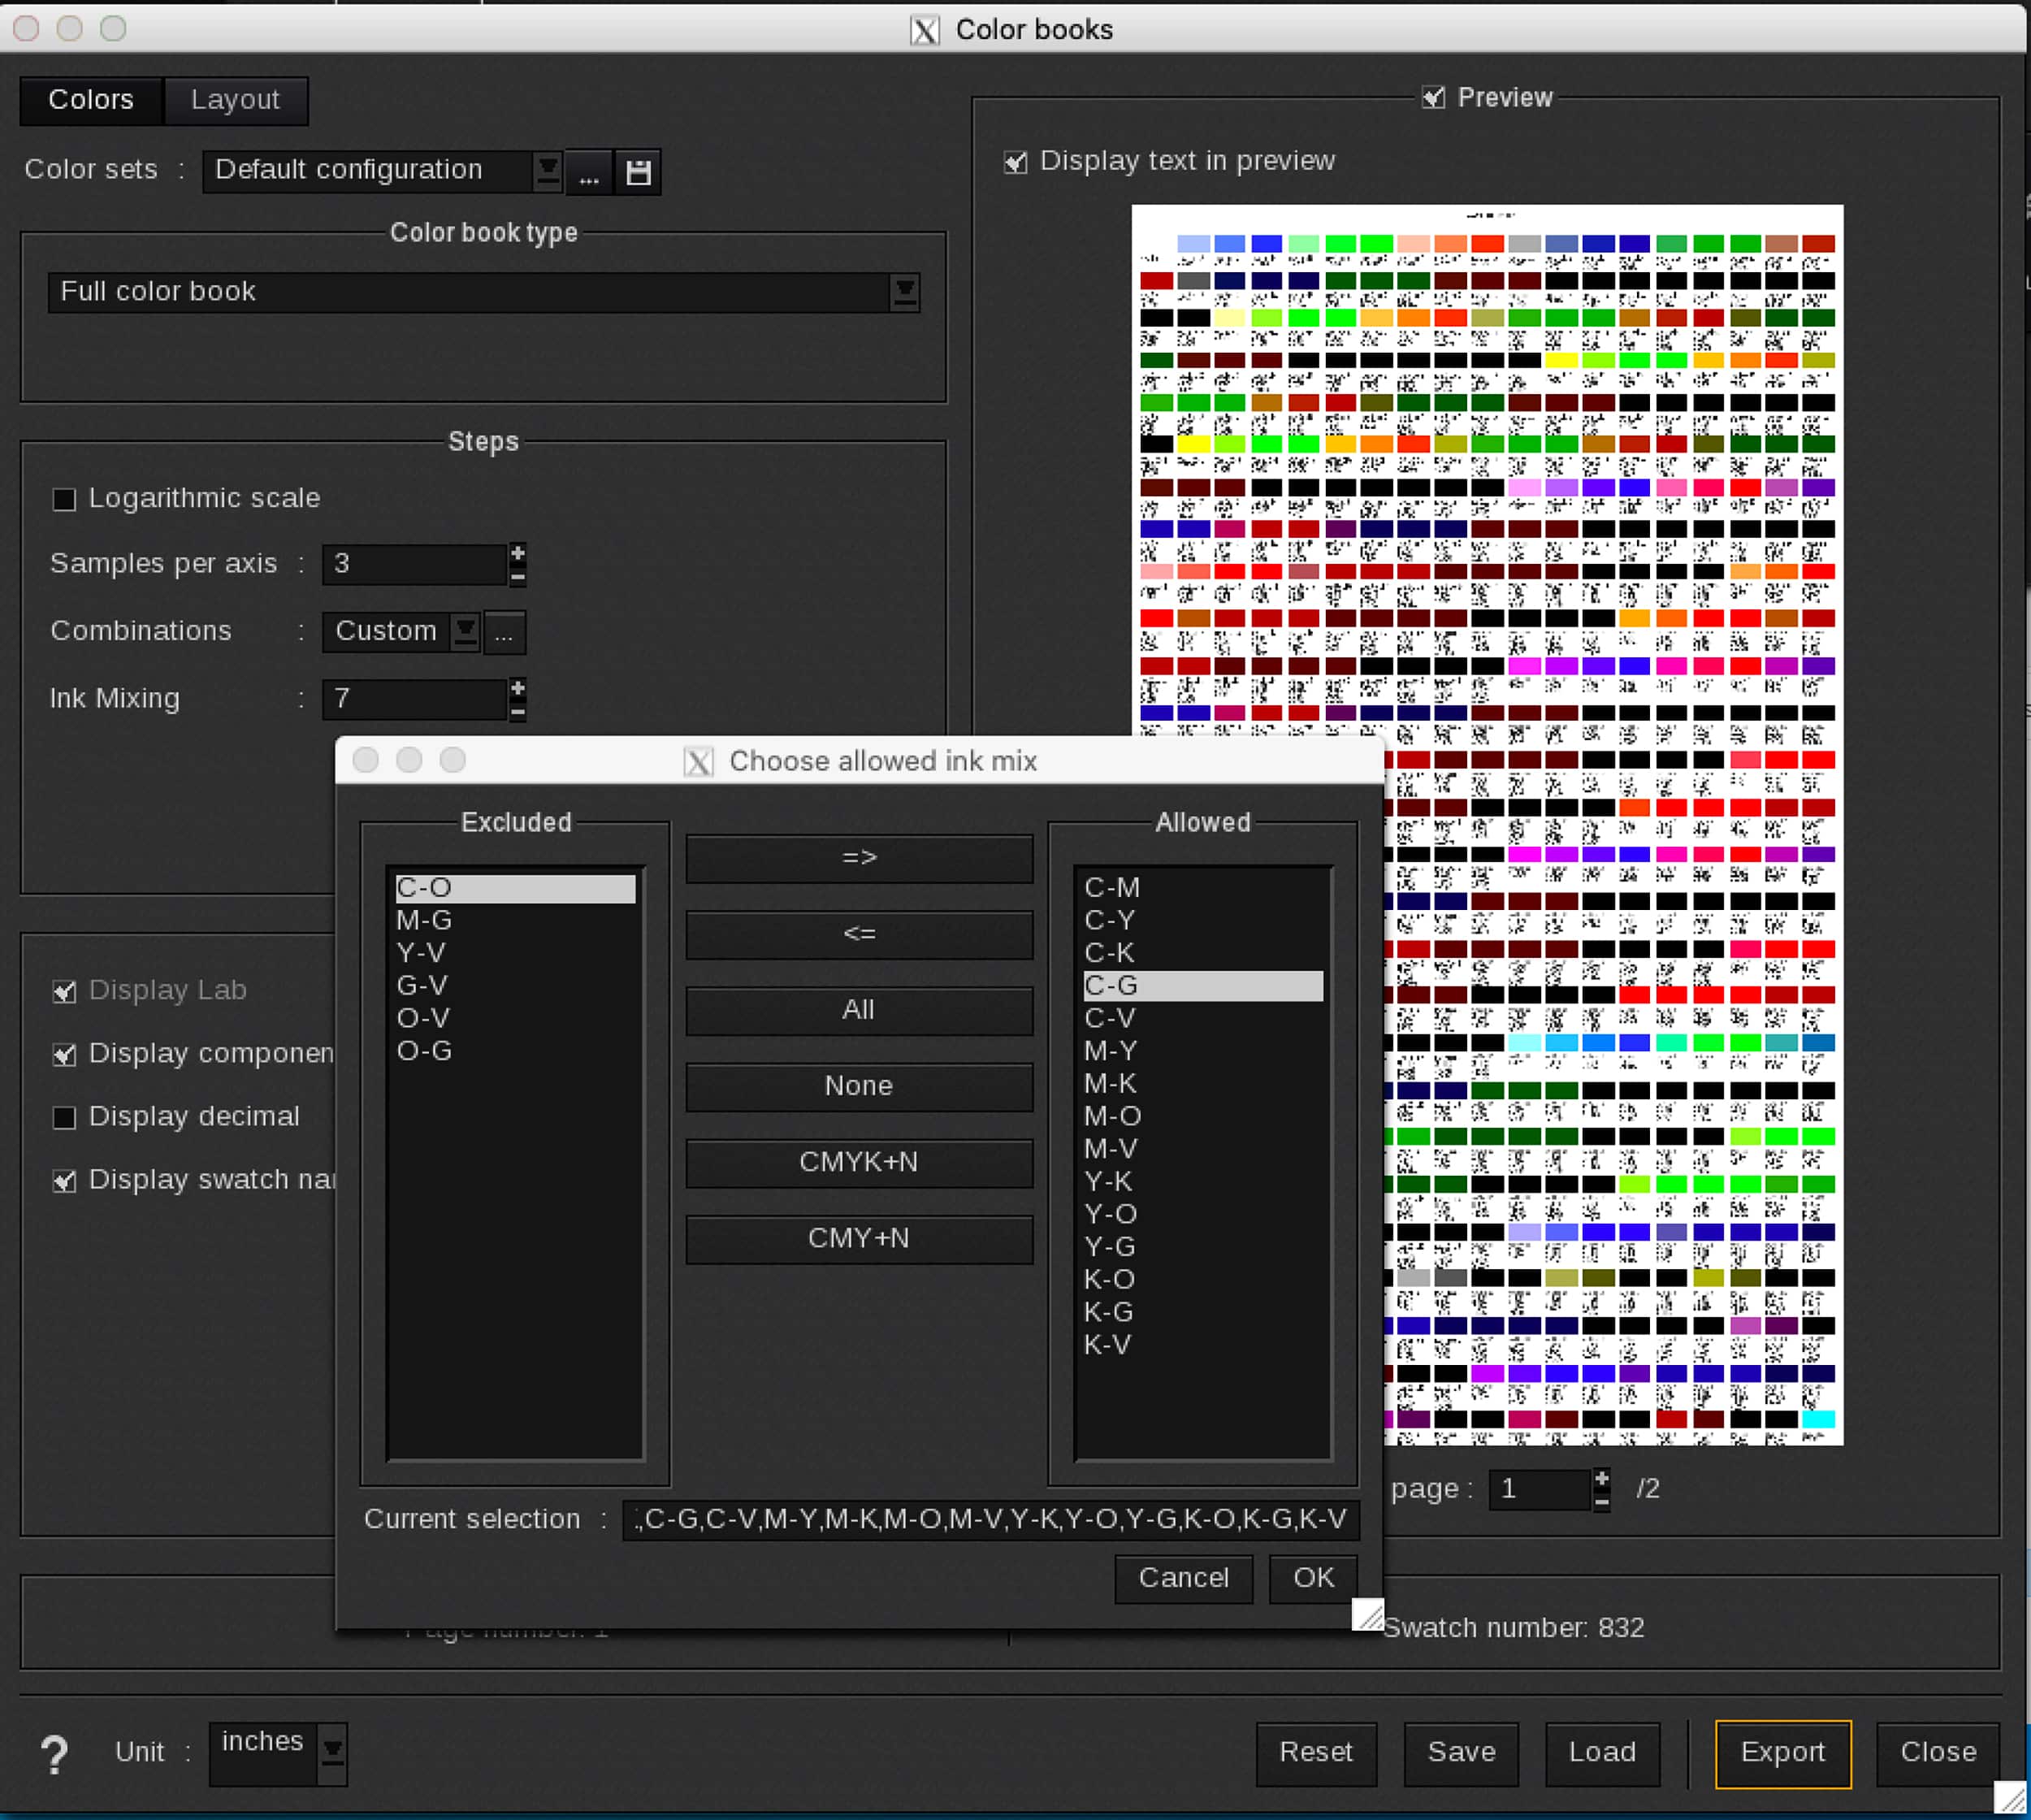 Caldera provides an option to control which color combinations you want in your color chart. Color combinations are based on the ink setup of your printer.